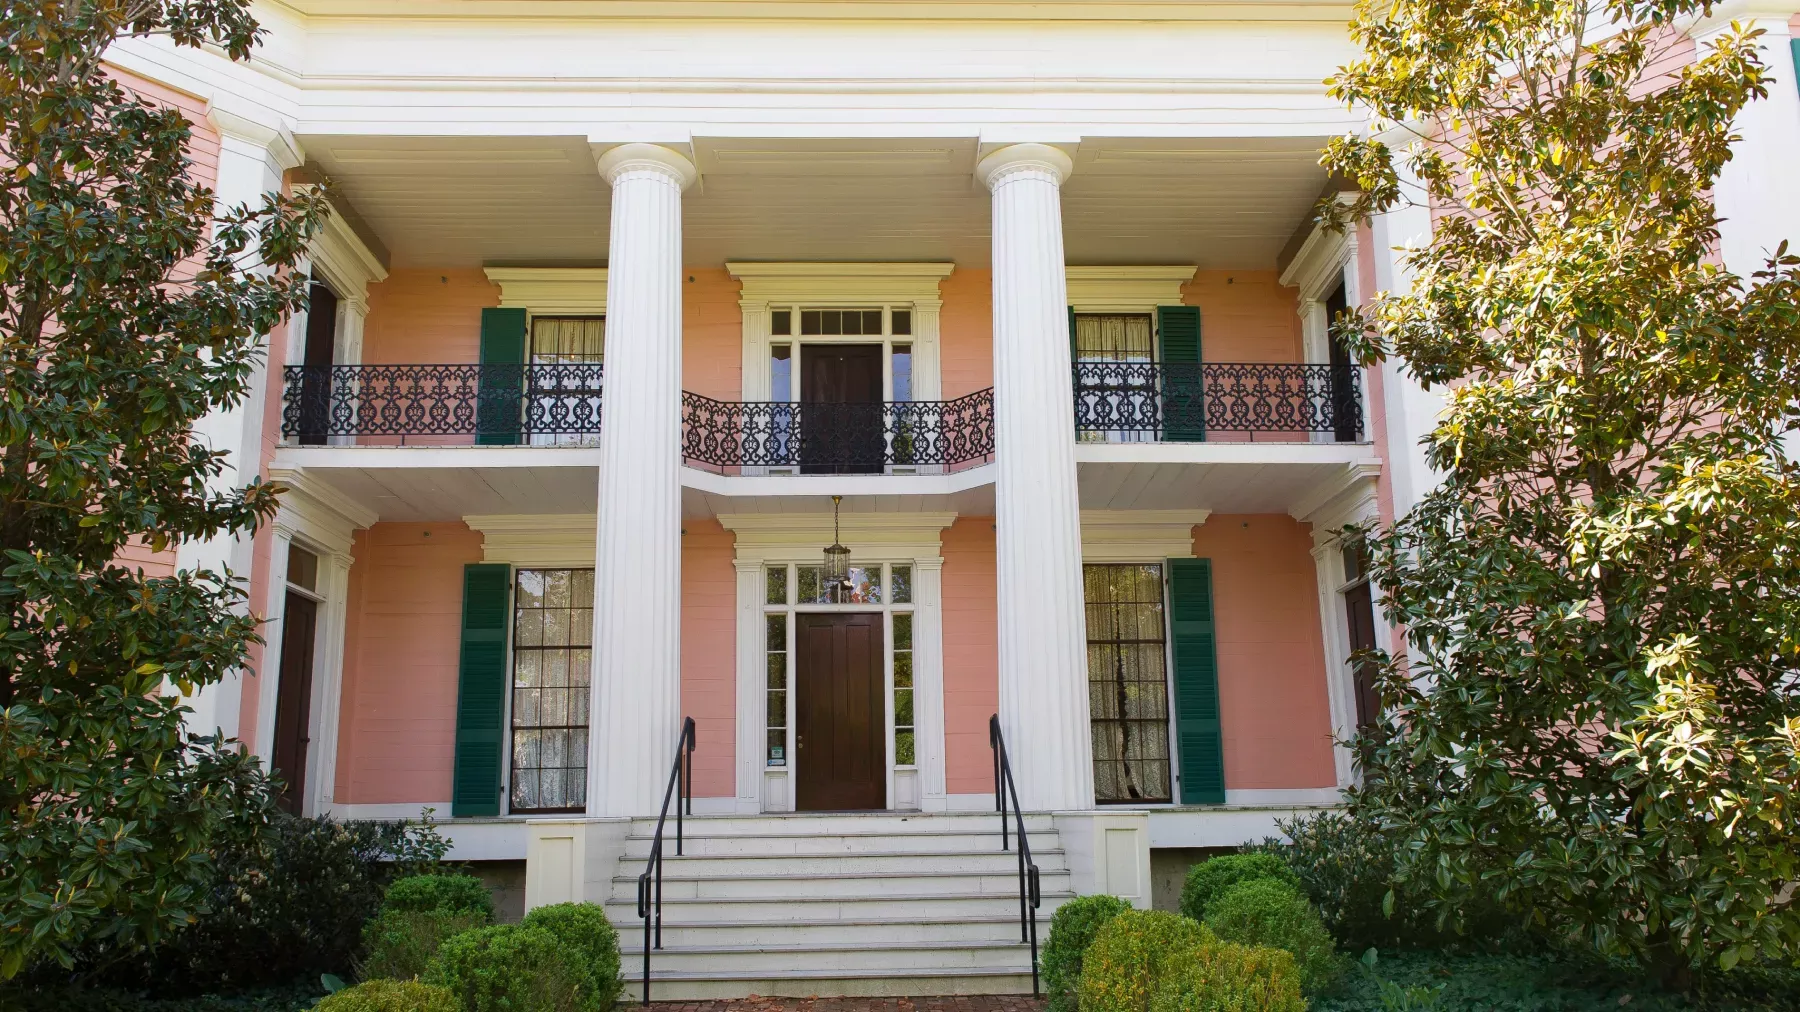 A two-story, pink historic building with large white columns, green shutters, and intricate black wrought-iron balcony railings. The entrance features a dark wood door, flanked by windows. The front garden has neatly trimmed bushes, and two tall trees frame the building.